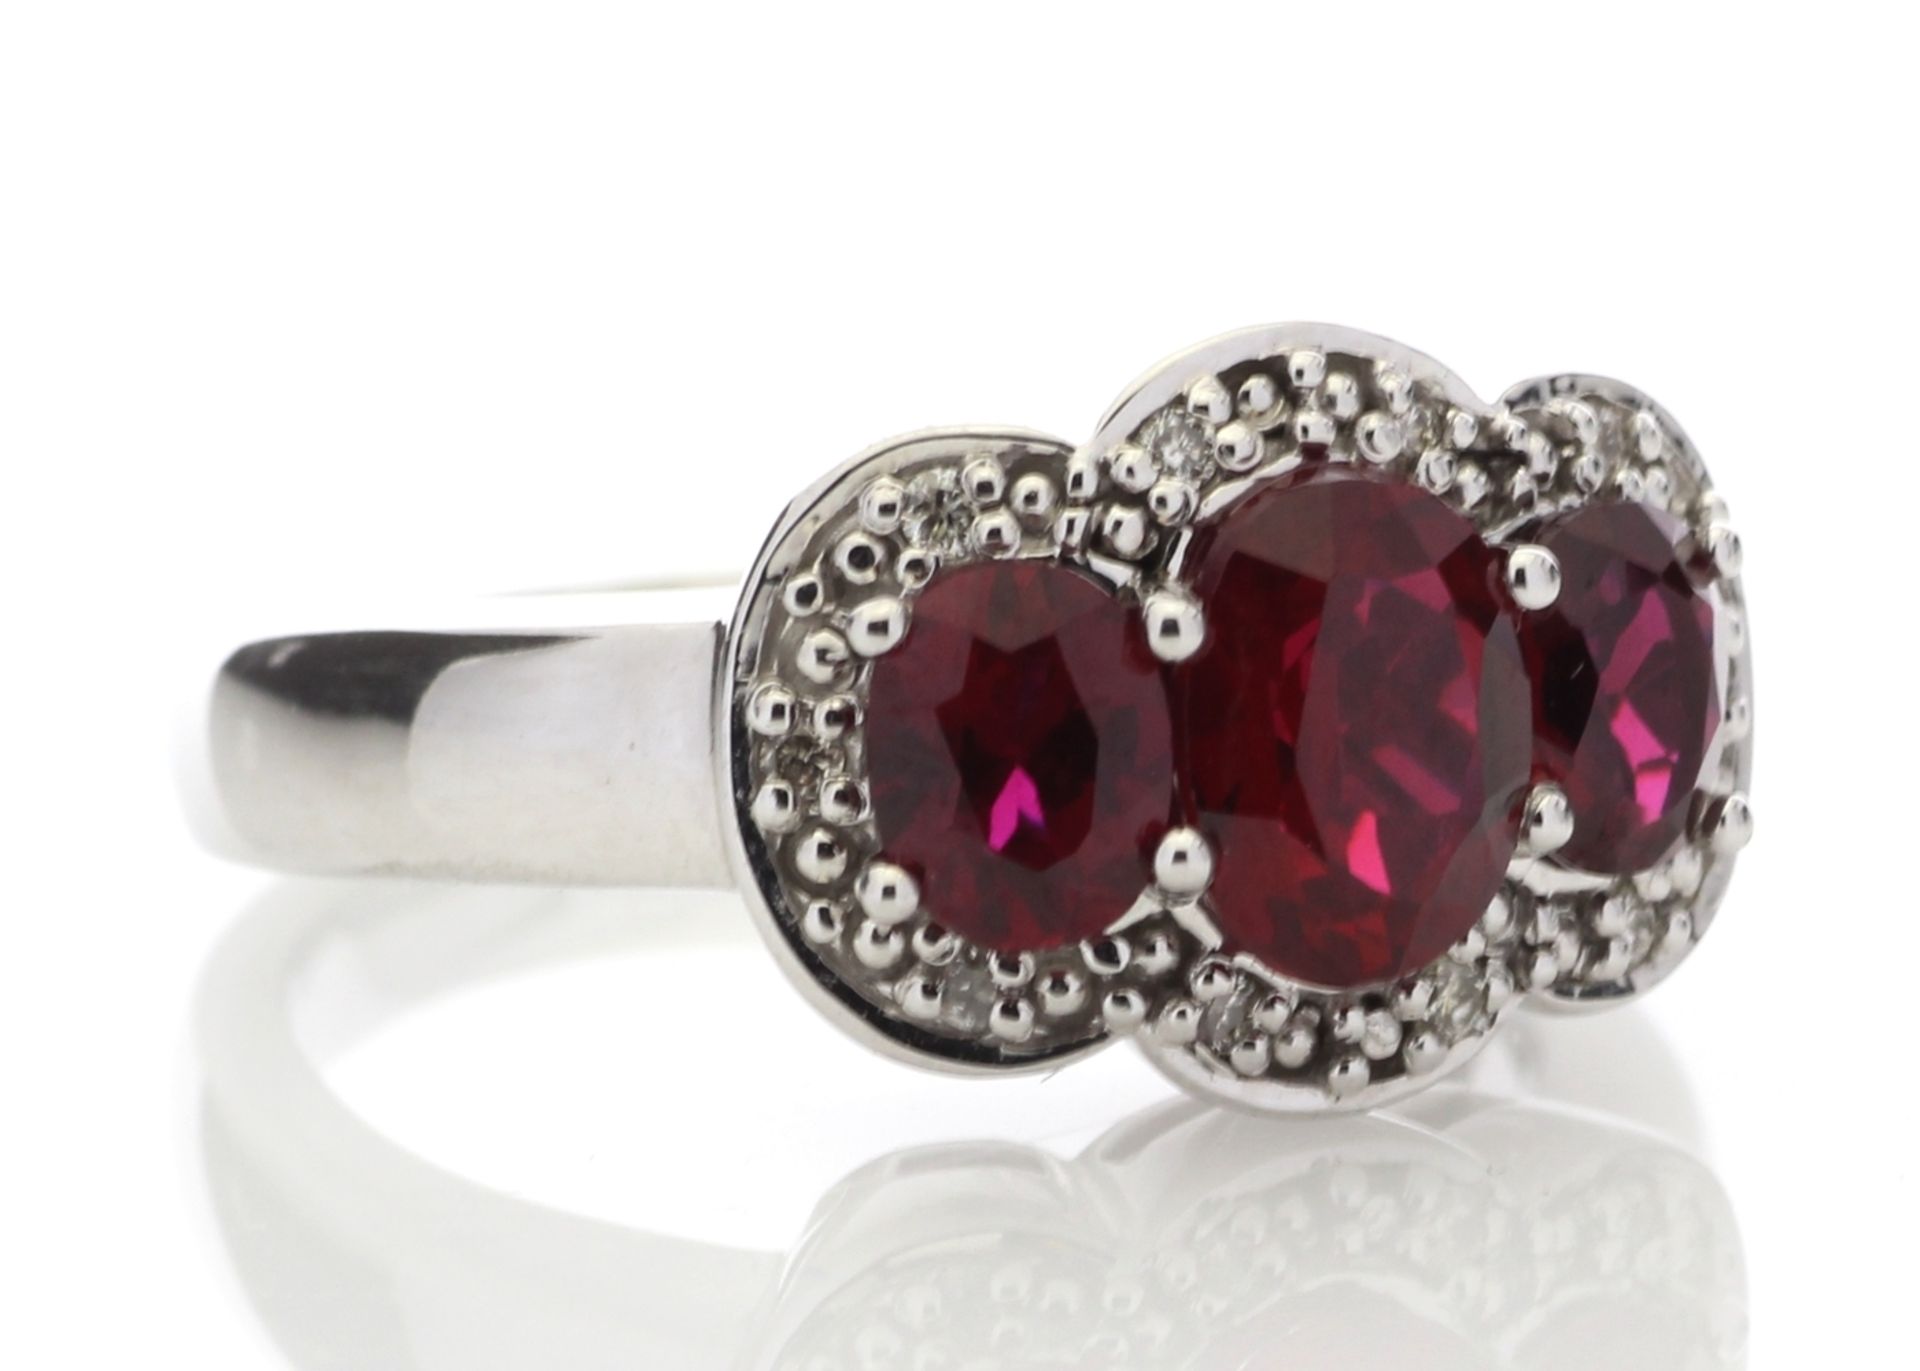 9ct White Gold Created Ruby Diamond Cluster Ring 0.08 Carats - Image 4 of 5